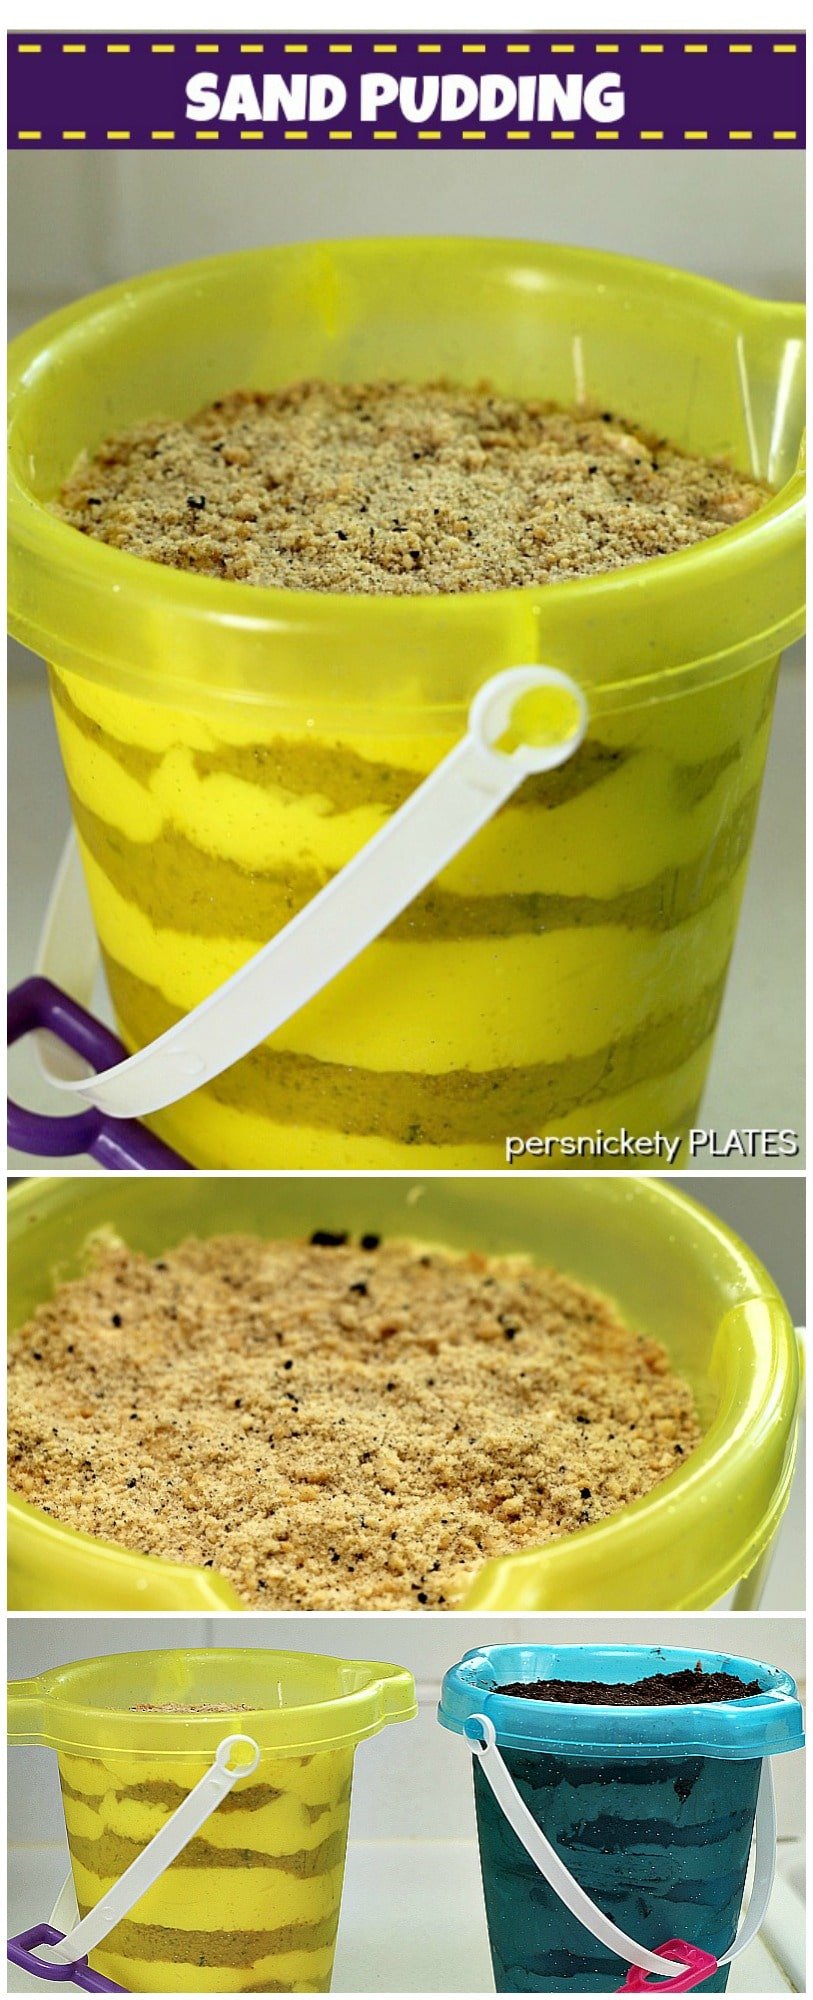 Golden Oreo Sand Pudding is such a fun summer treat! You make Oreo cookie "sand" and layer it with pudding to create a beach themed dessert that looks just like sand. Serve it out of a bucket for a crowd or individual pudding cups. | www.persnicketyplates.com